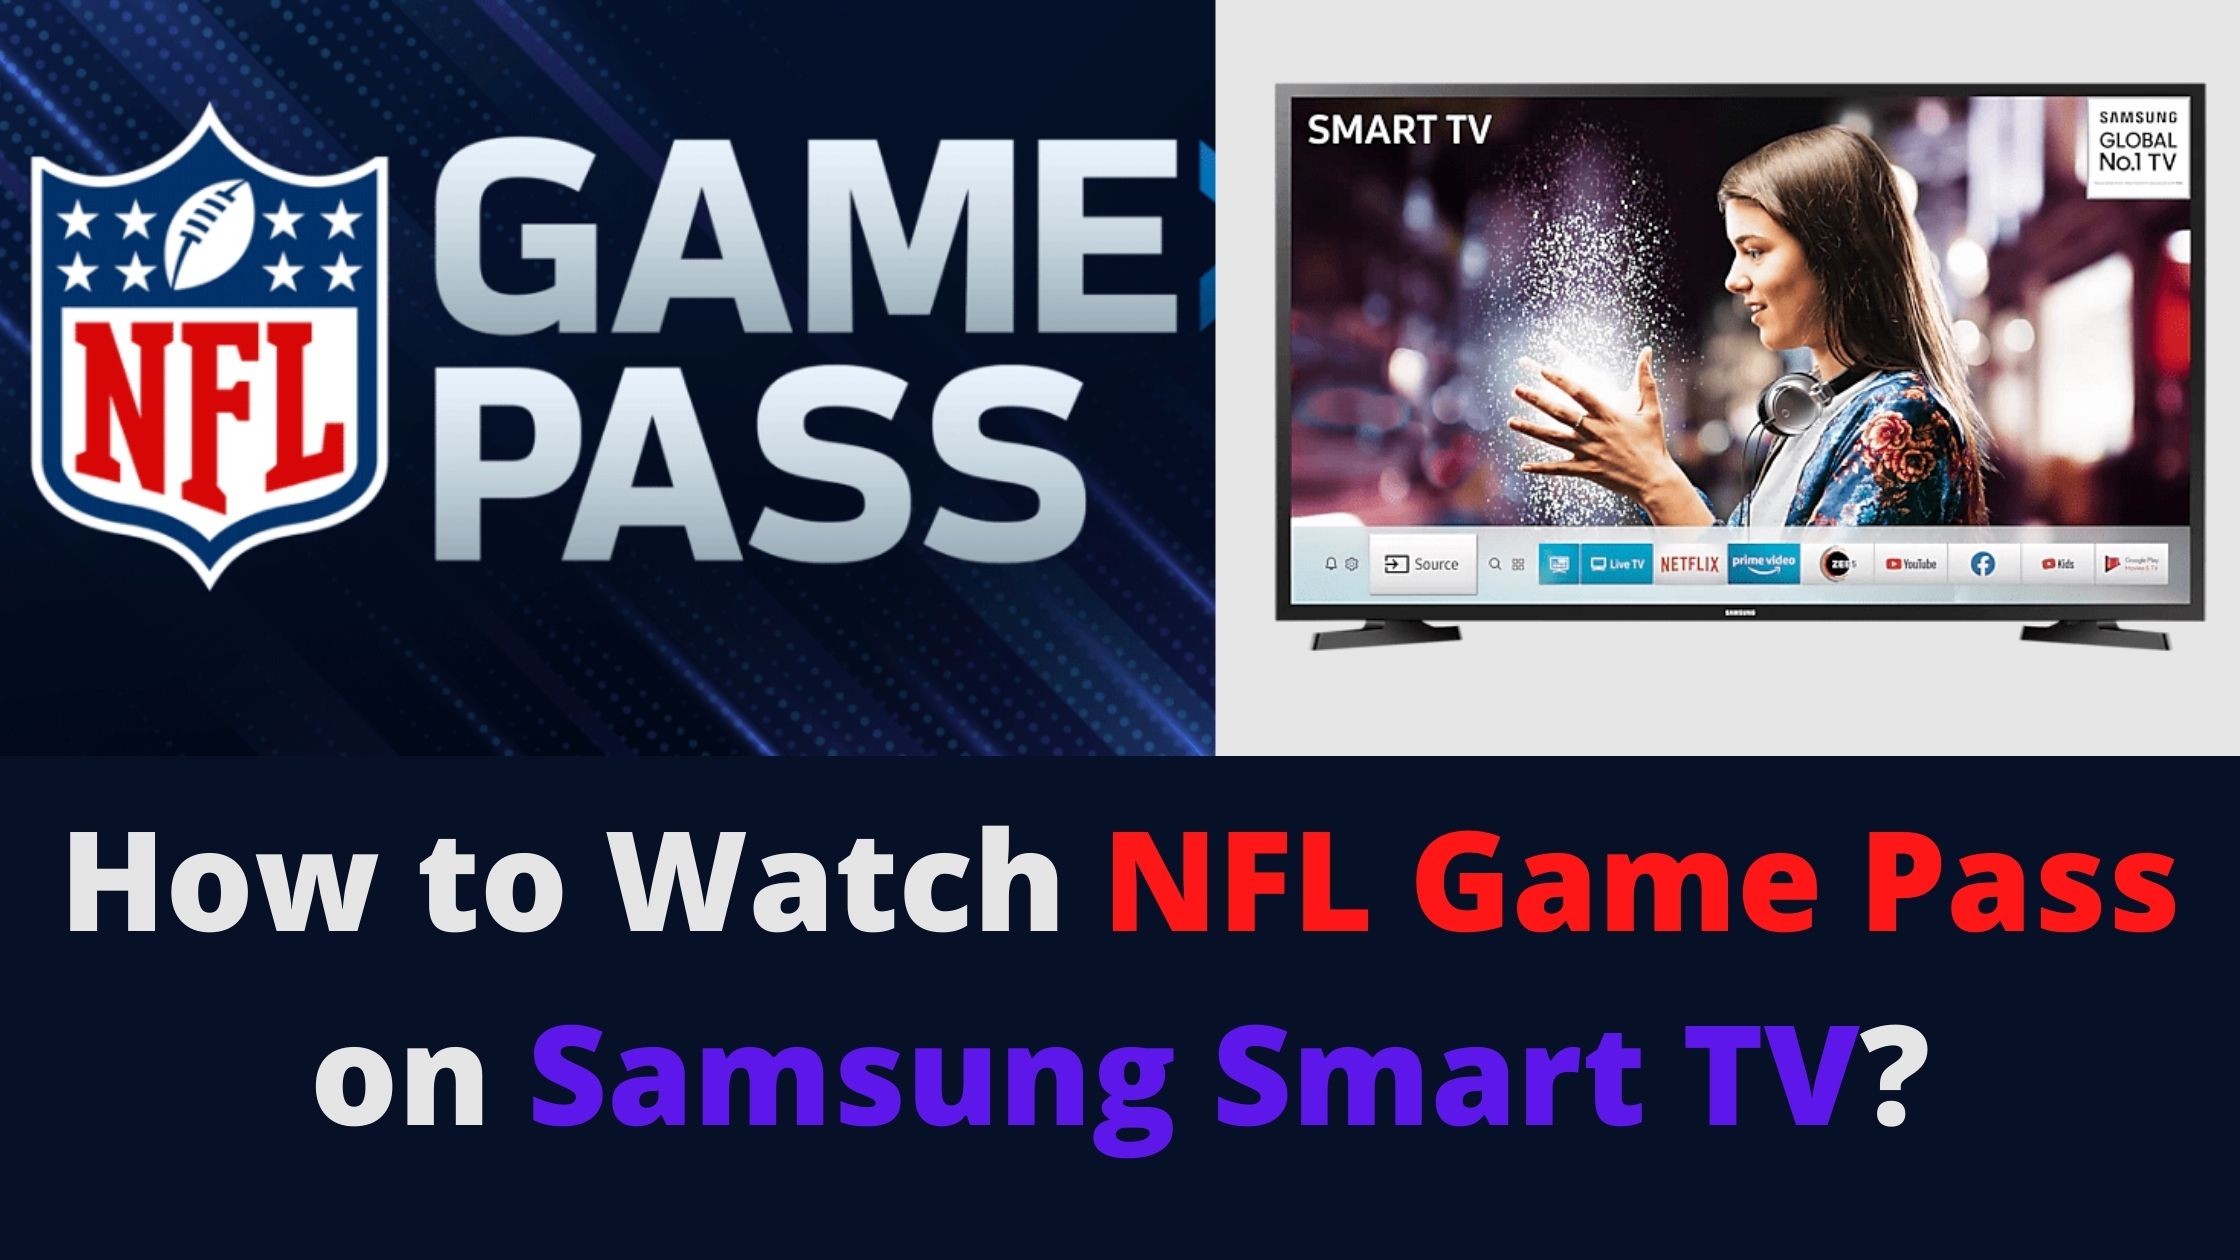 How to Watch NFL Game Pass on Samsung Smart TV?